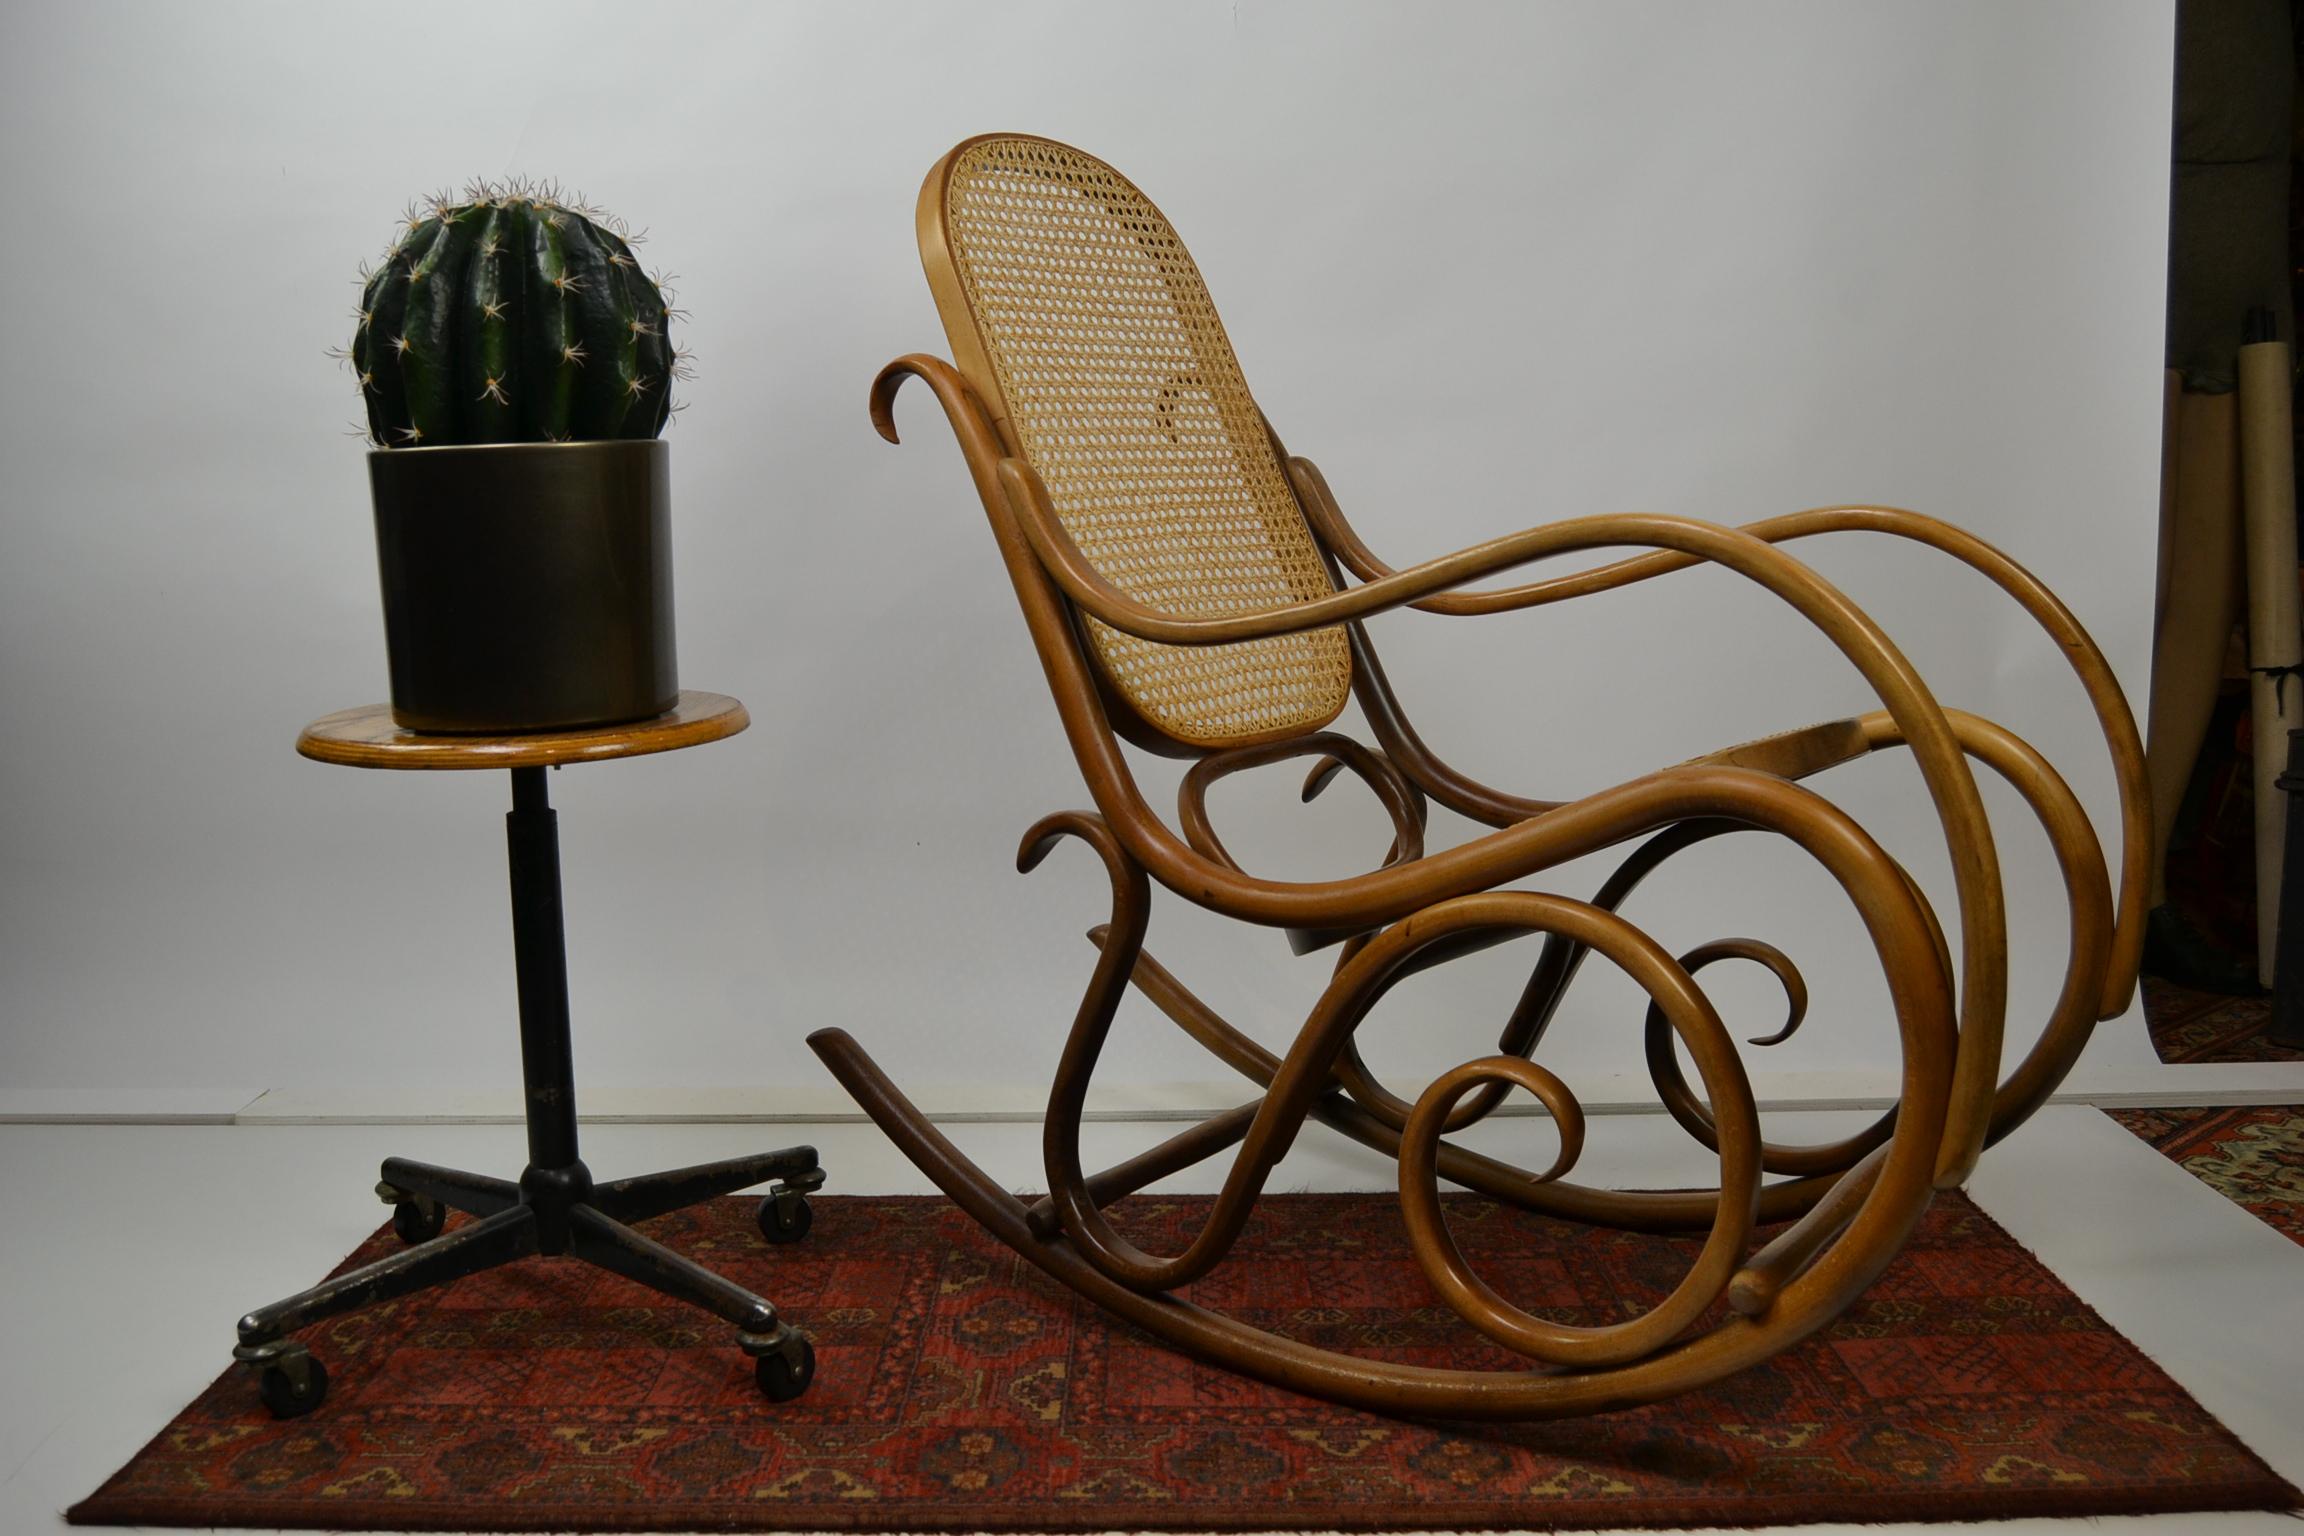 Bentwood rocking chair - rocking stool
with cane back and seating, which has been renewed, so perfect sitting.
Midcentury rocker chair in Thonet style.
Iconic model of Thonet with curling shapes, Jugenstill style.
This type of bentwood armchair